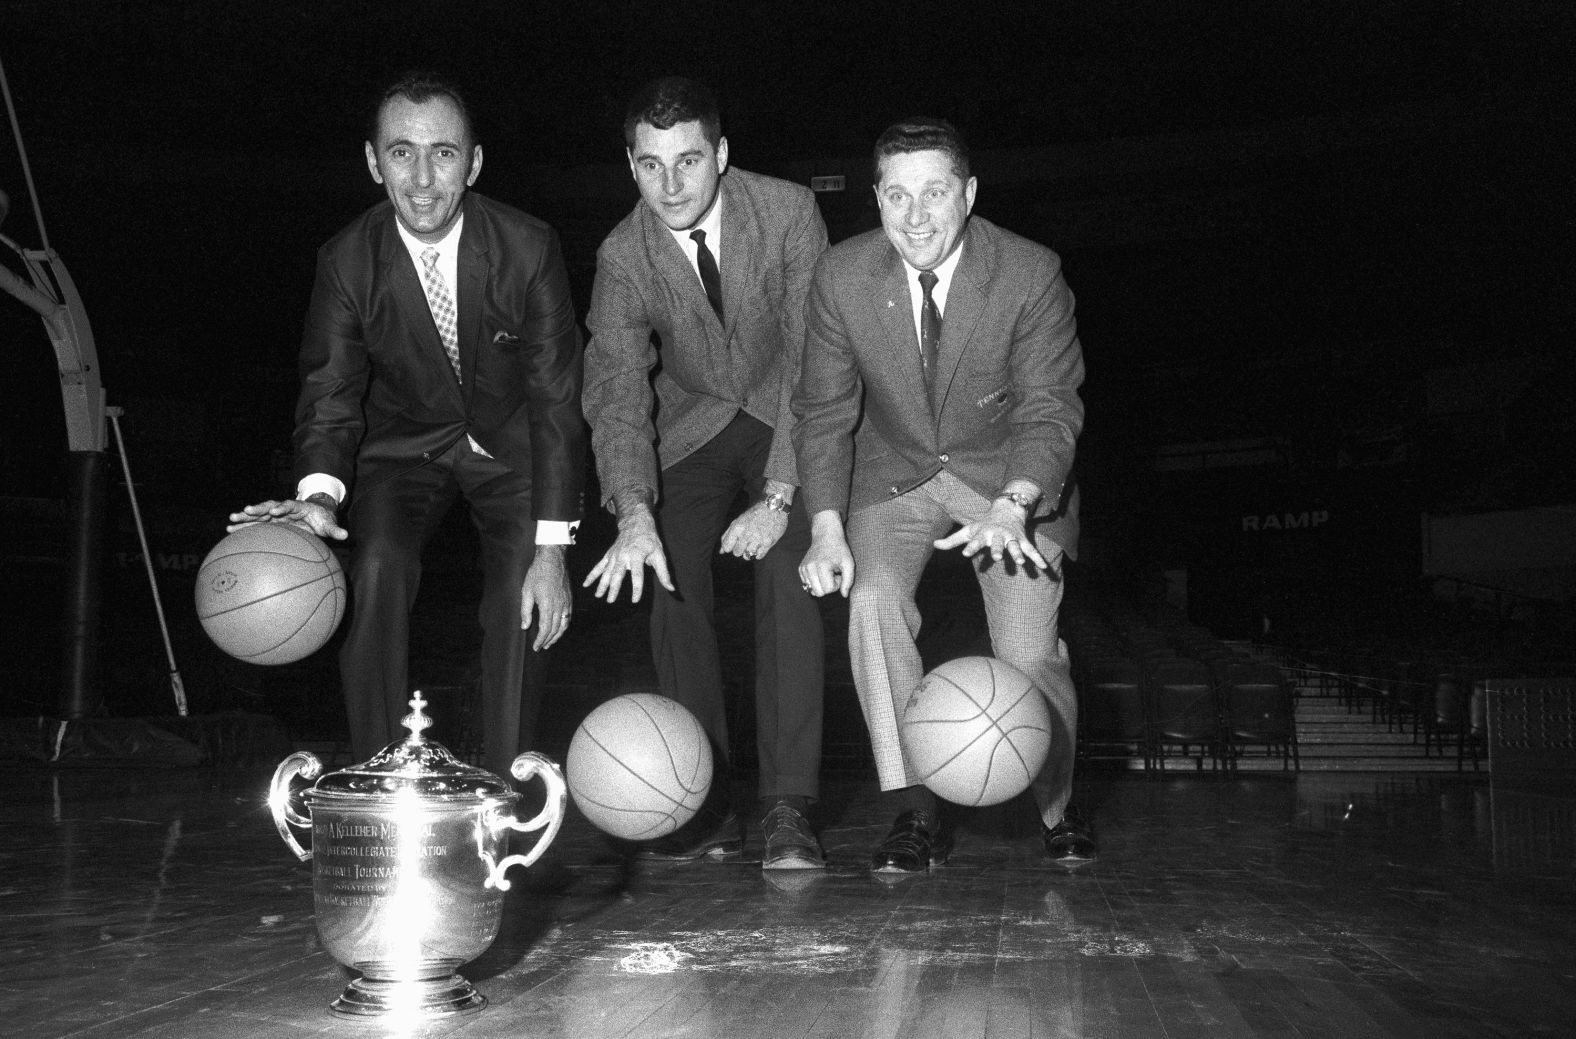 Knight is photographed with Boston College coach Bob Cousy and Tennessee coach Ray Mears ahead of the National Invitation Tournament in 1969. Knight coached the Army men's basketball team from 1963 to 1971.